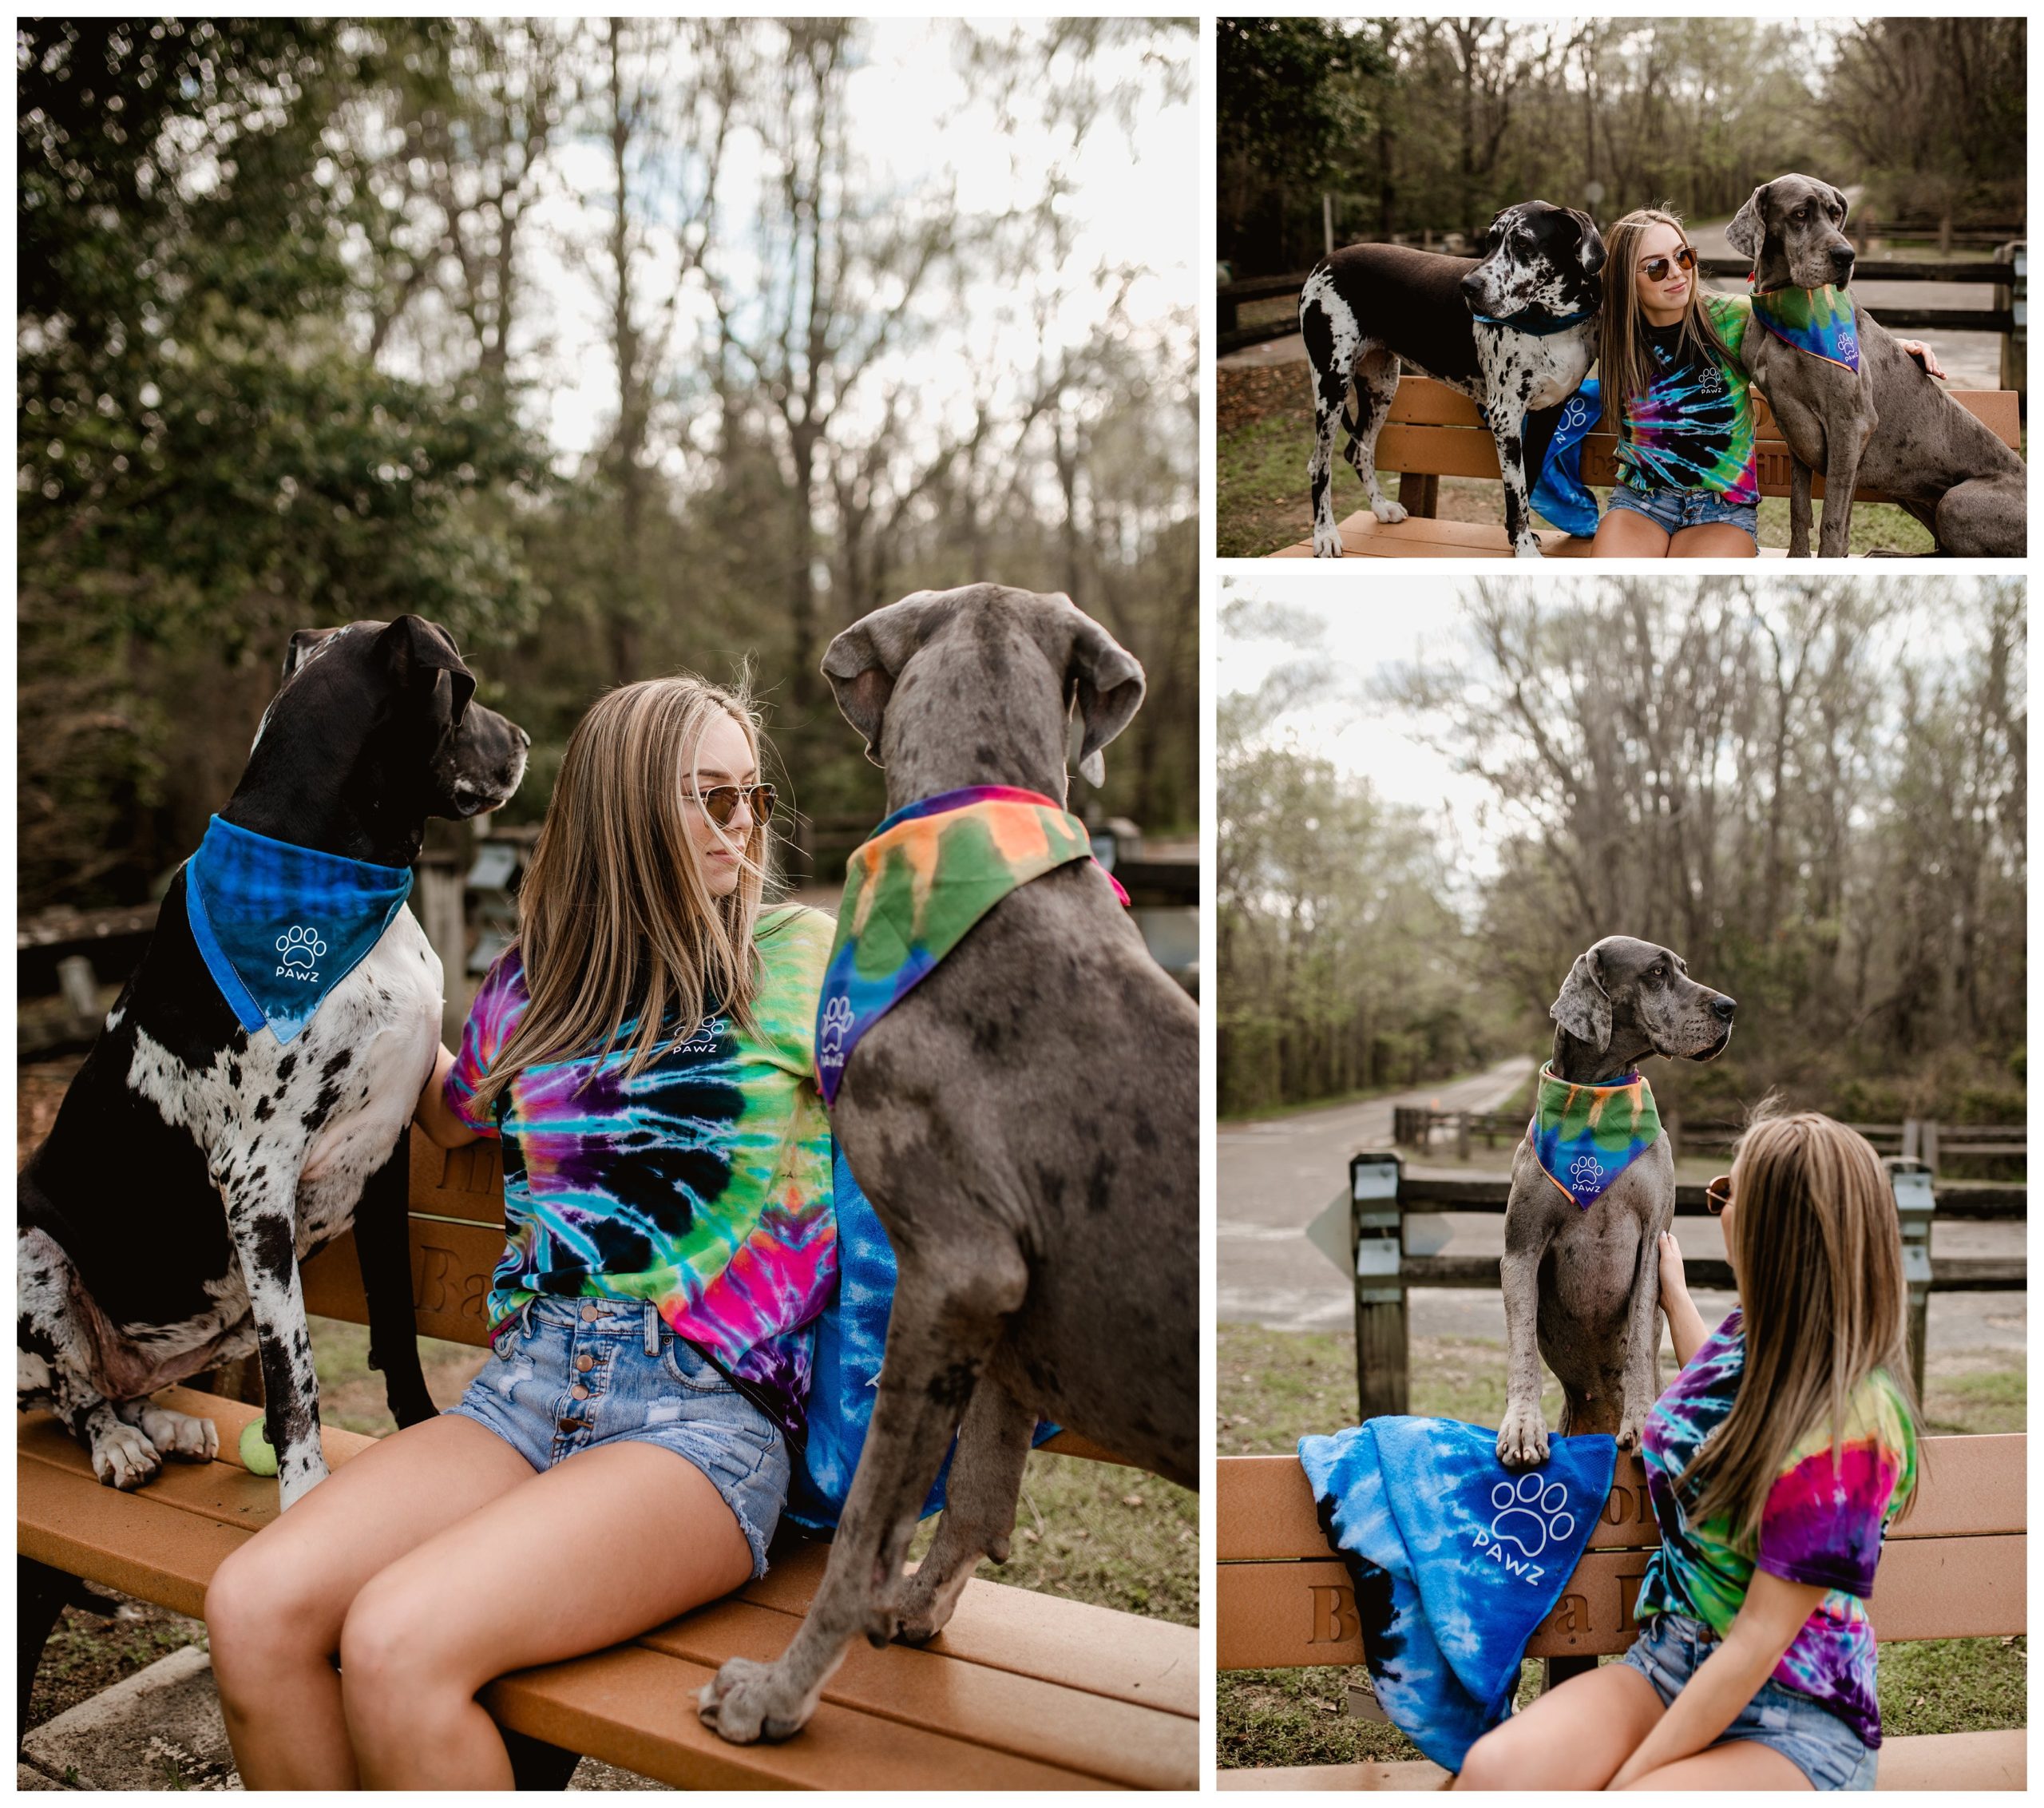 Great Danes with their owner have pet portrait session in the outdoors of Florida.